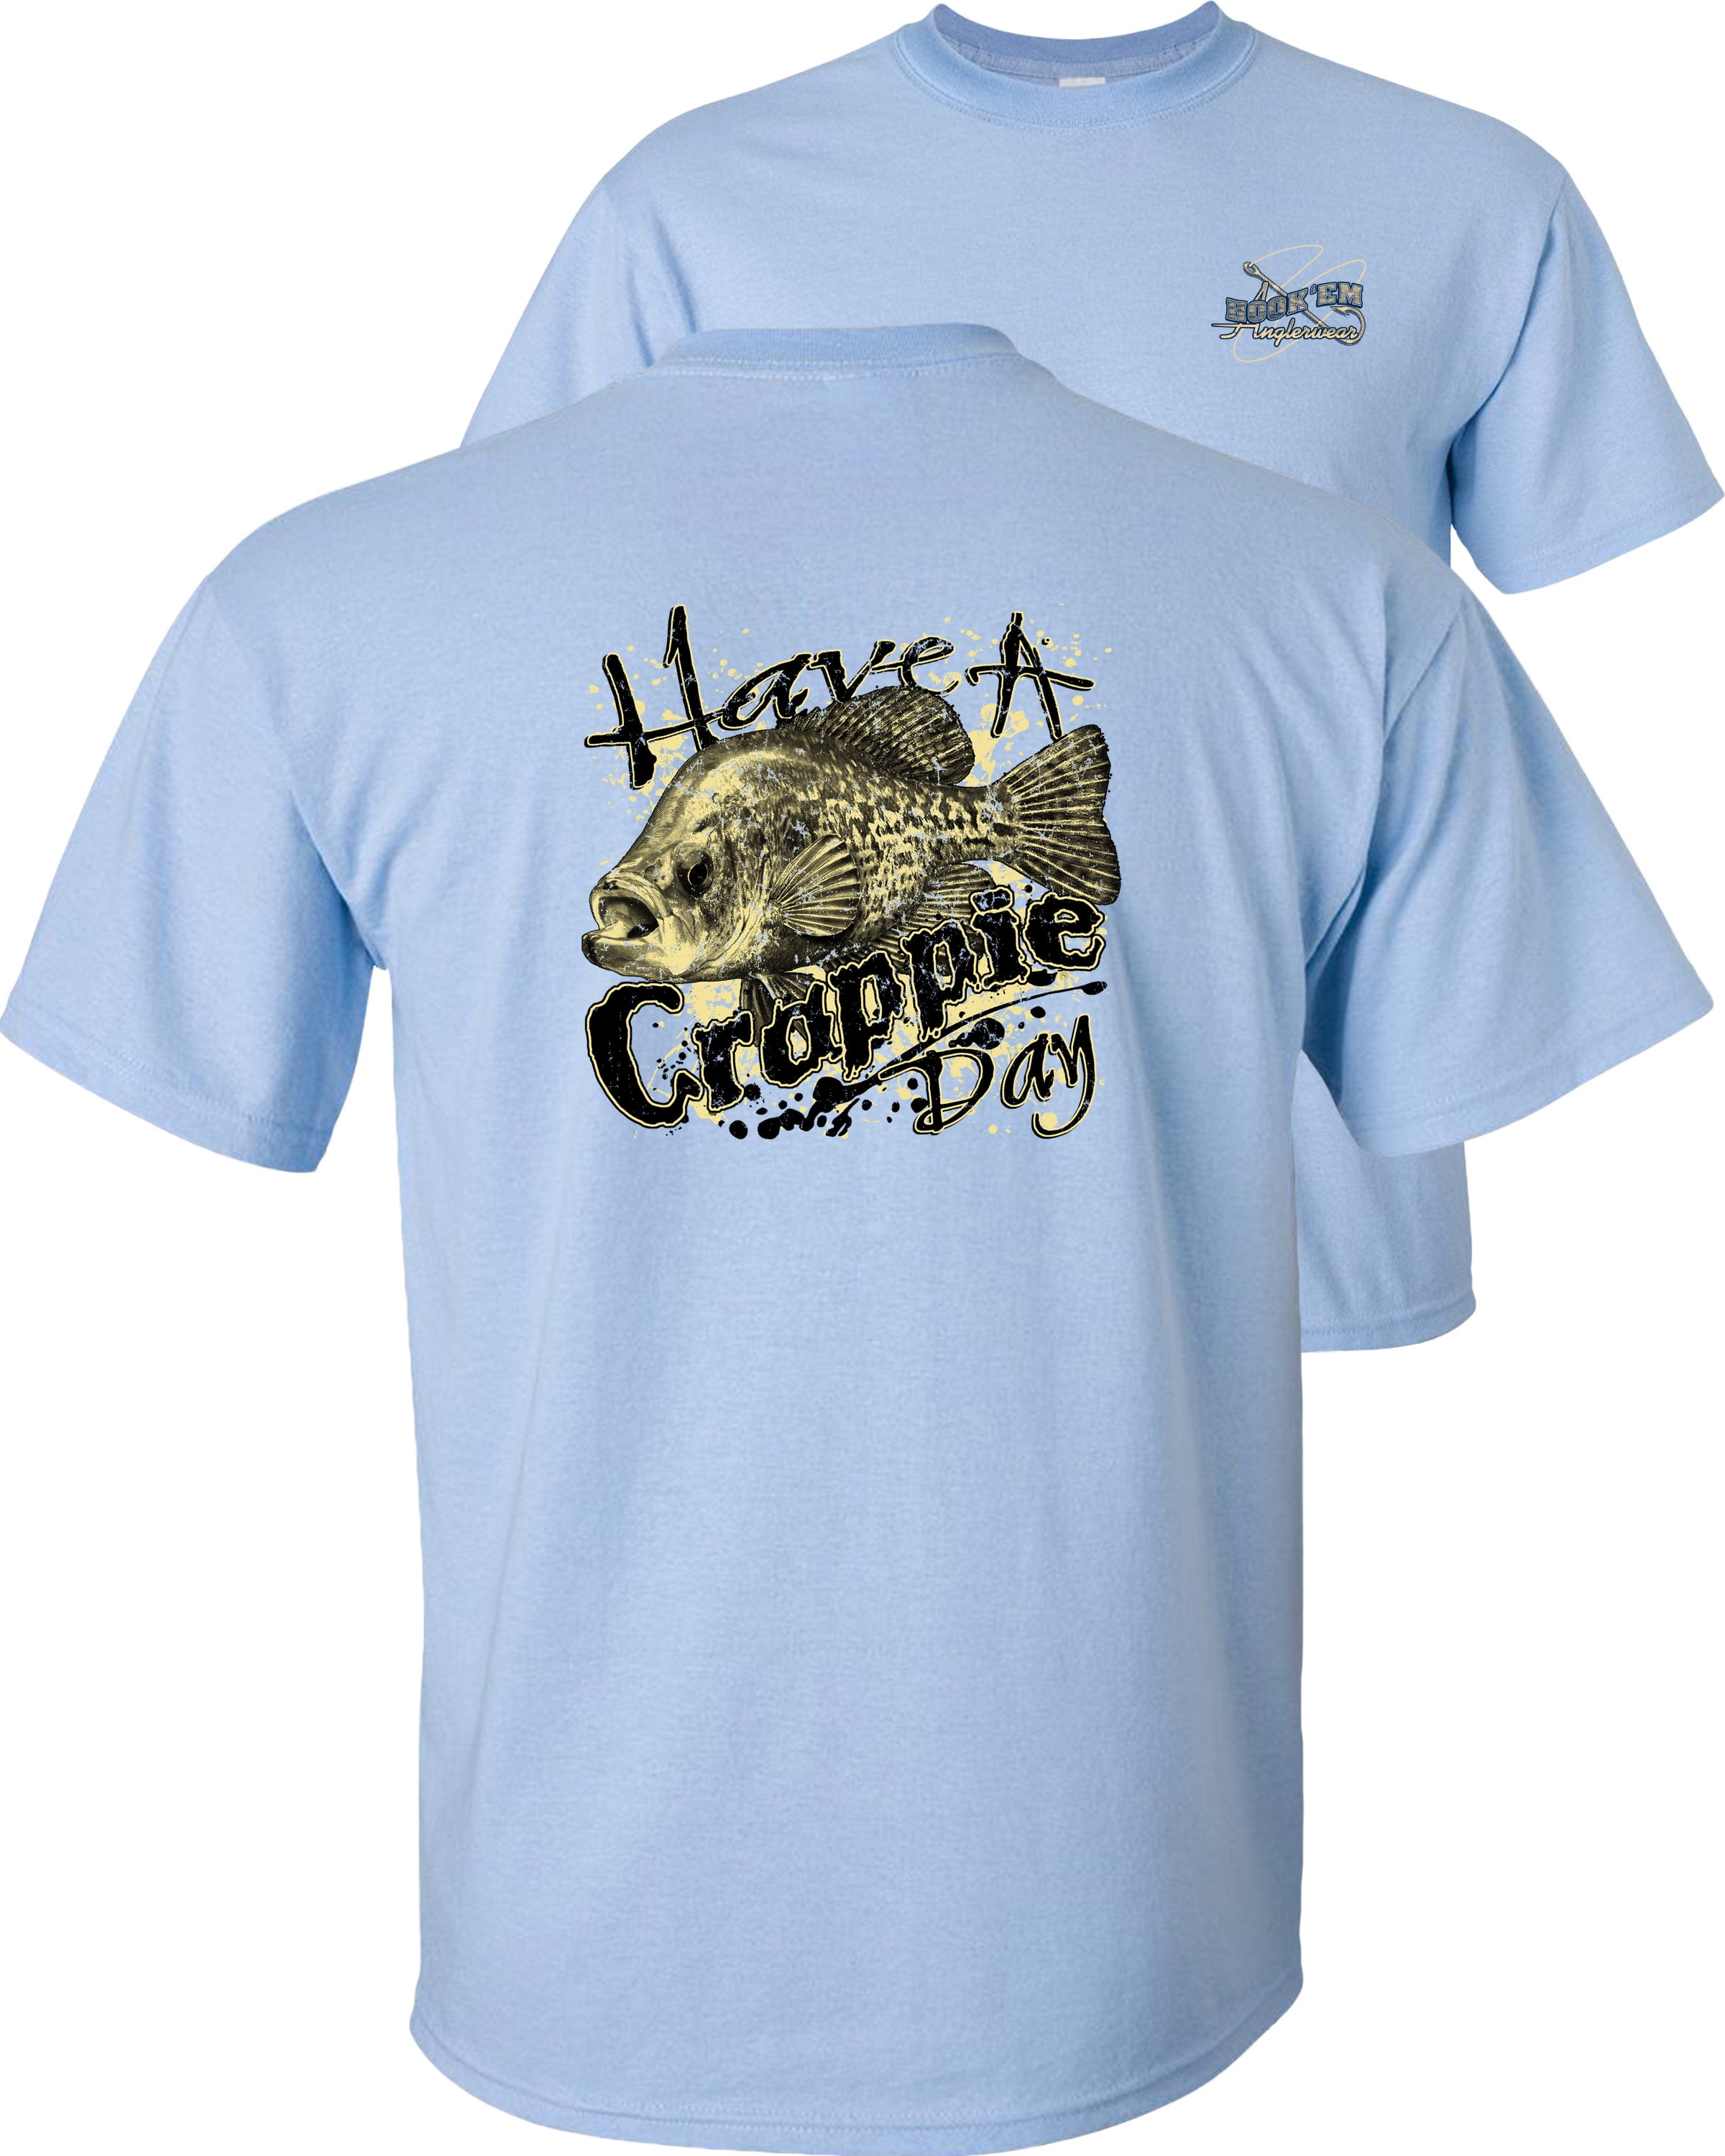 Fair Game Have a Crappie Day T-Shirt, Fishing Graphic Tee-Light Blue-M